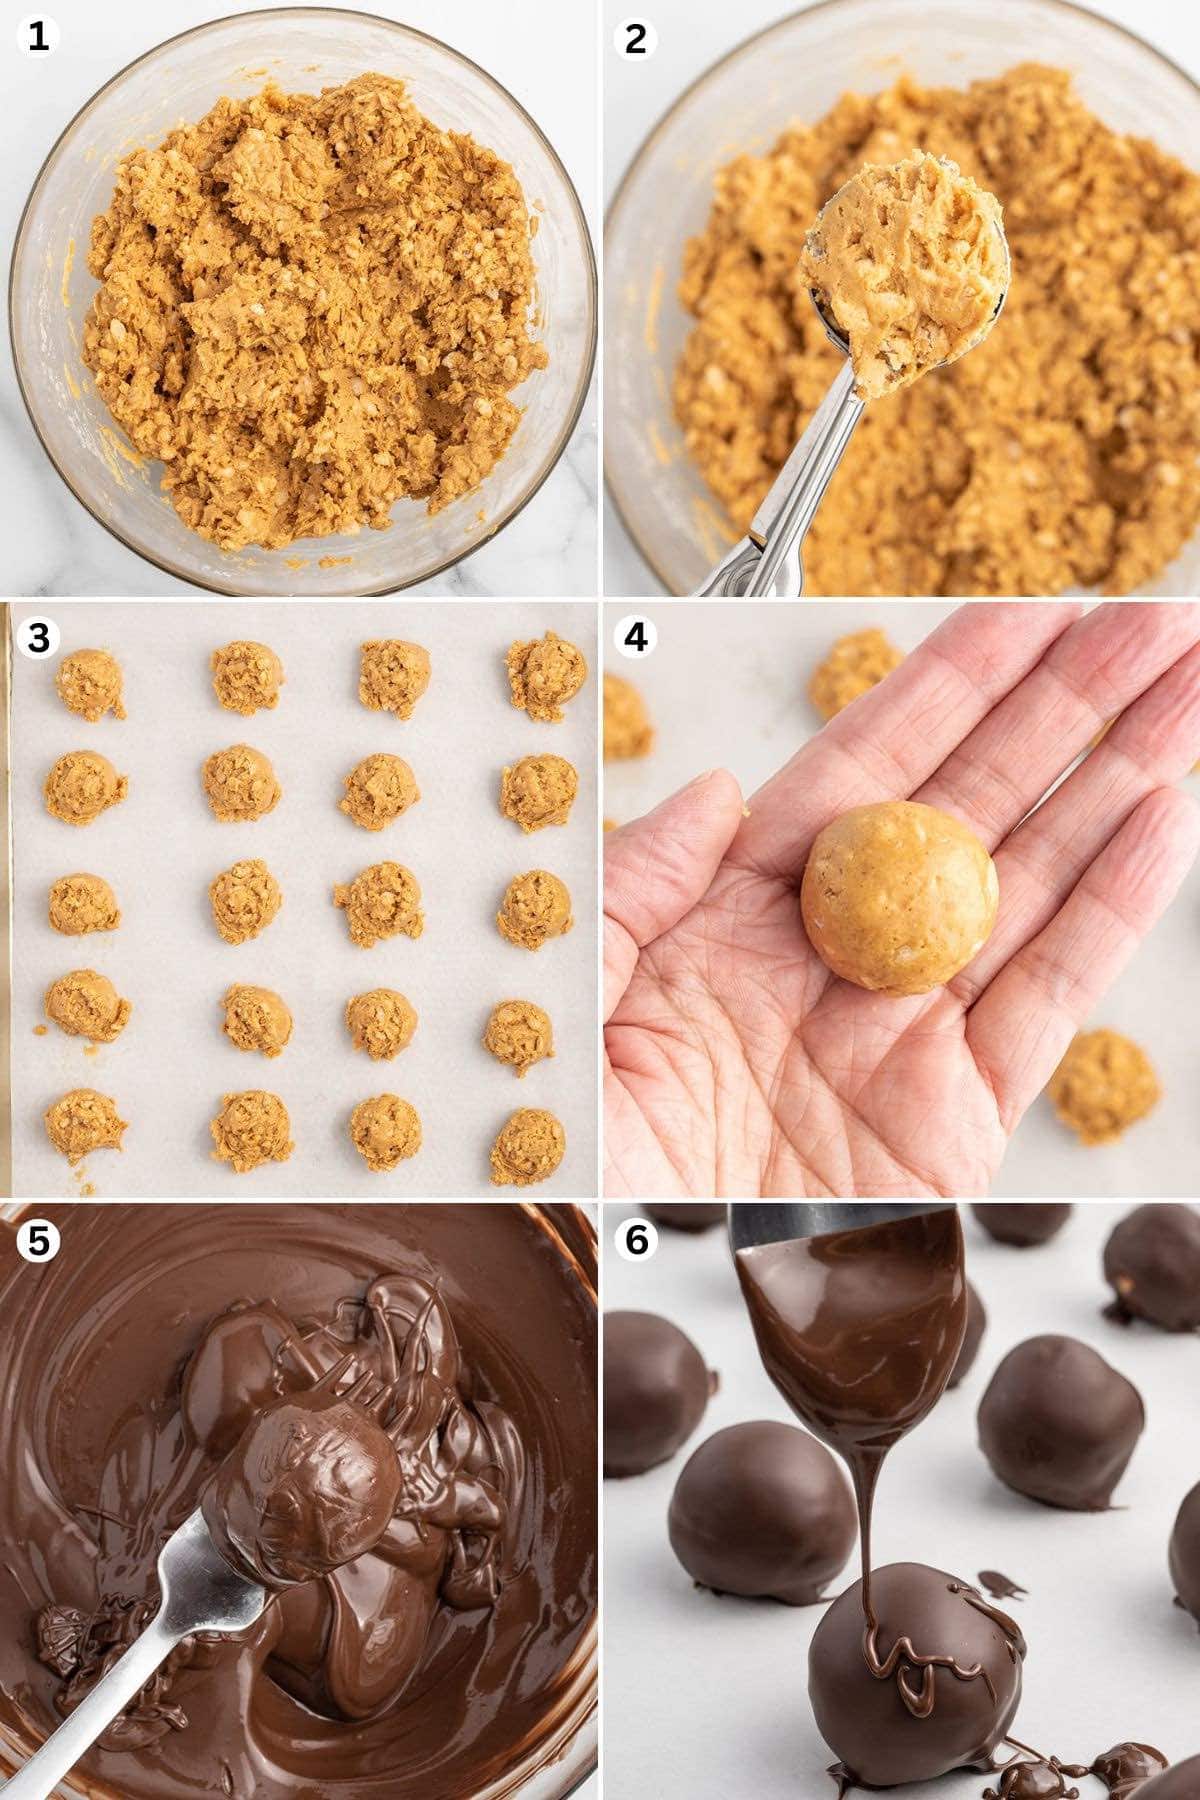 mix the peanut butter mixture in a bowl. scoop and roll into balls. dip in melted chocolate and drizzle with chocolate.